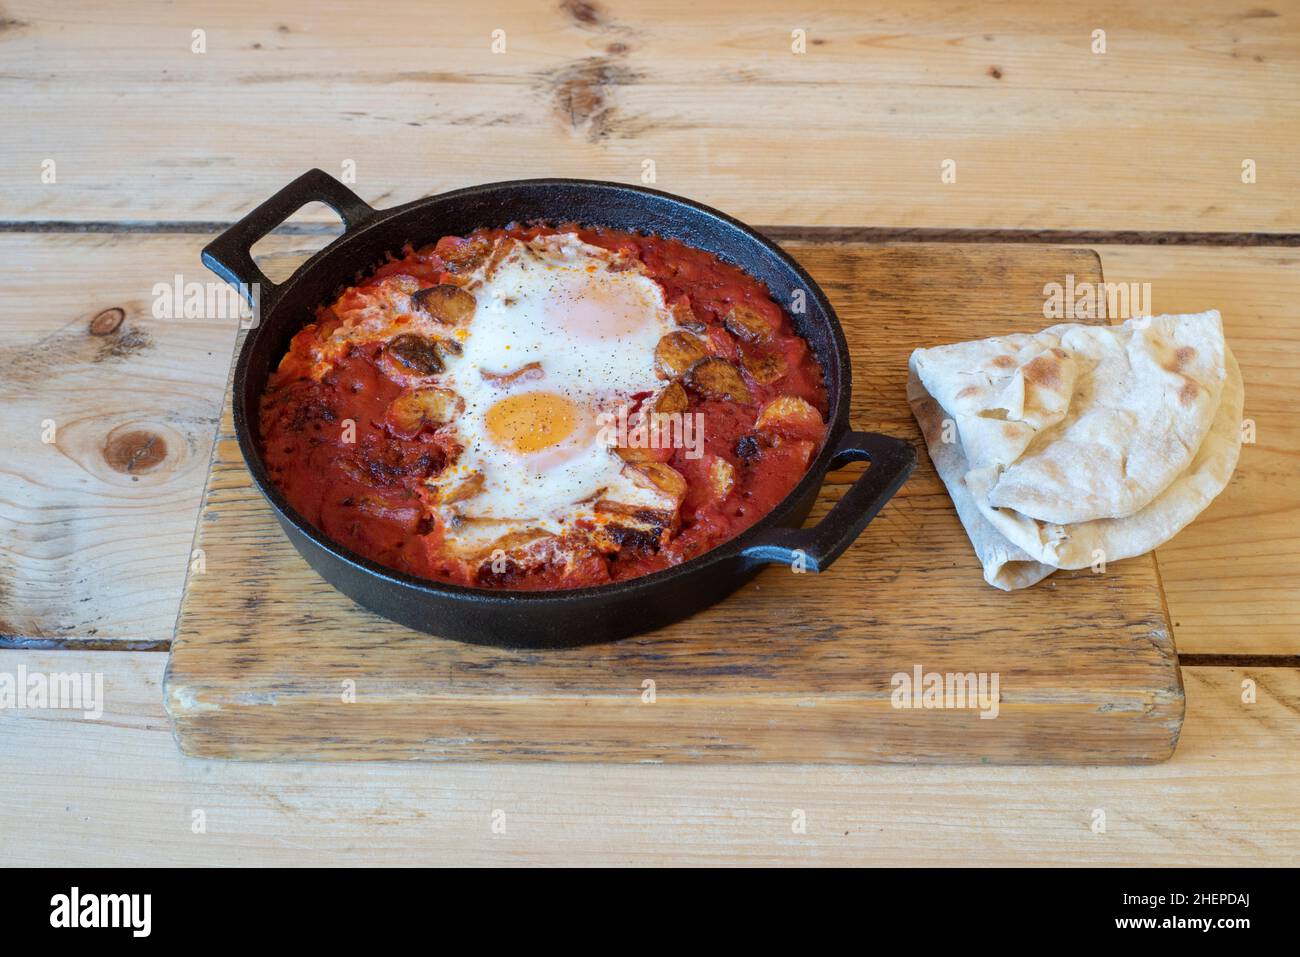 Egg, tomato & mushroom vegetarian breakfast sizzler in tomato sauce with dipping bread served in a hot cast iron skillet Stock Photo